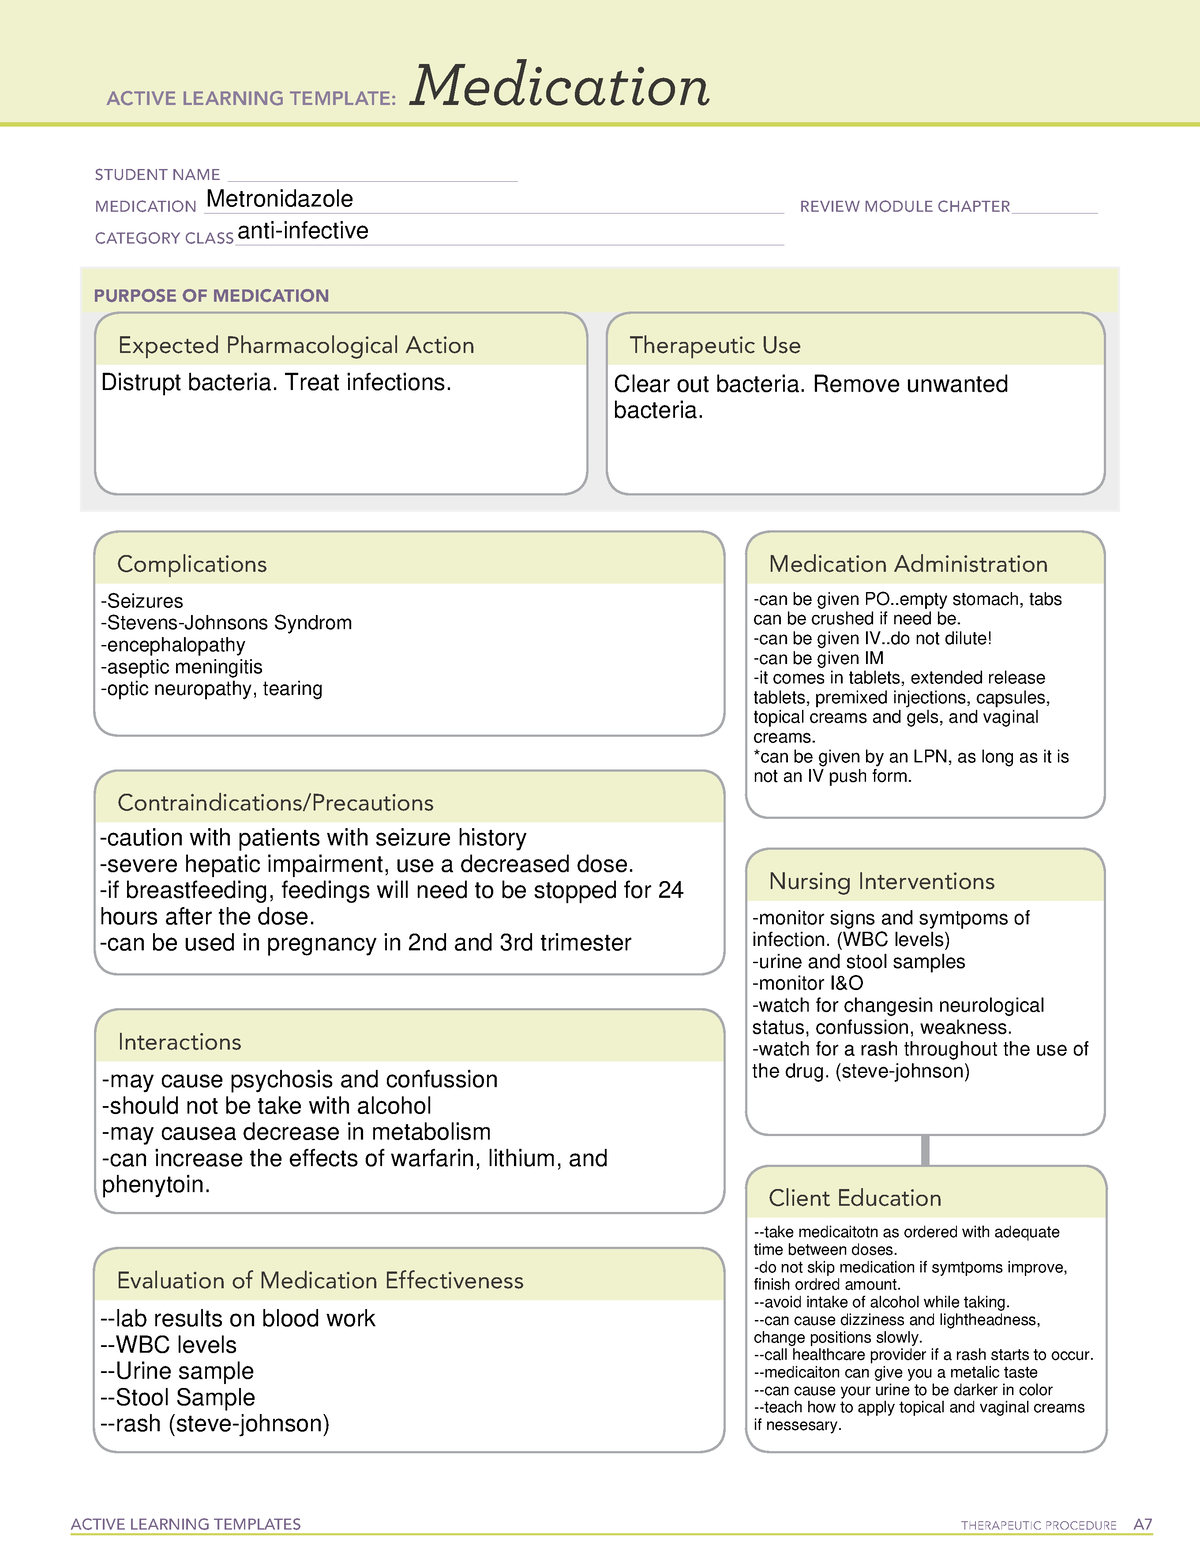 ATI medication Metronidazole template ACTIVE LEARNING TEMPLATES